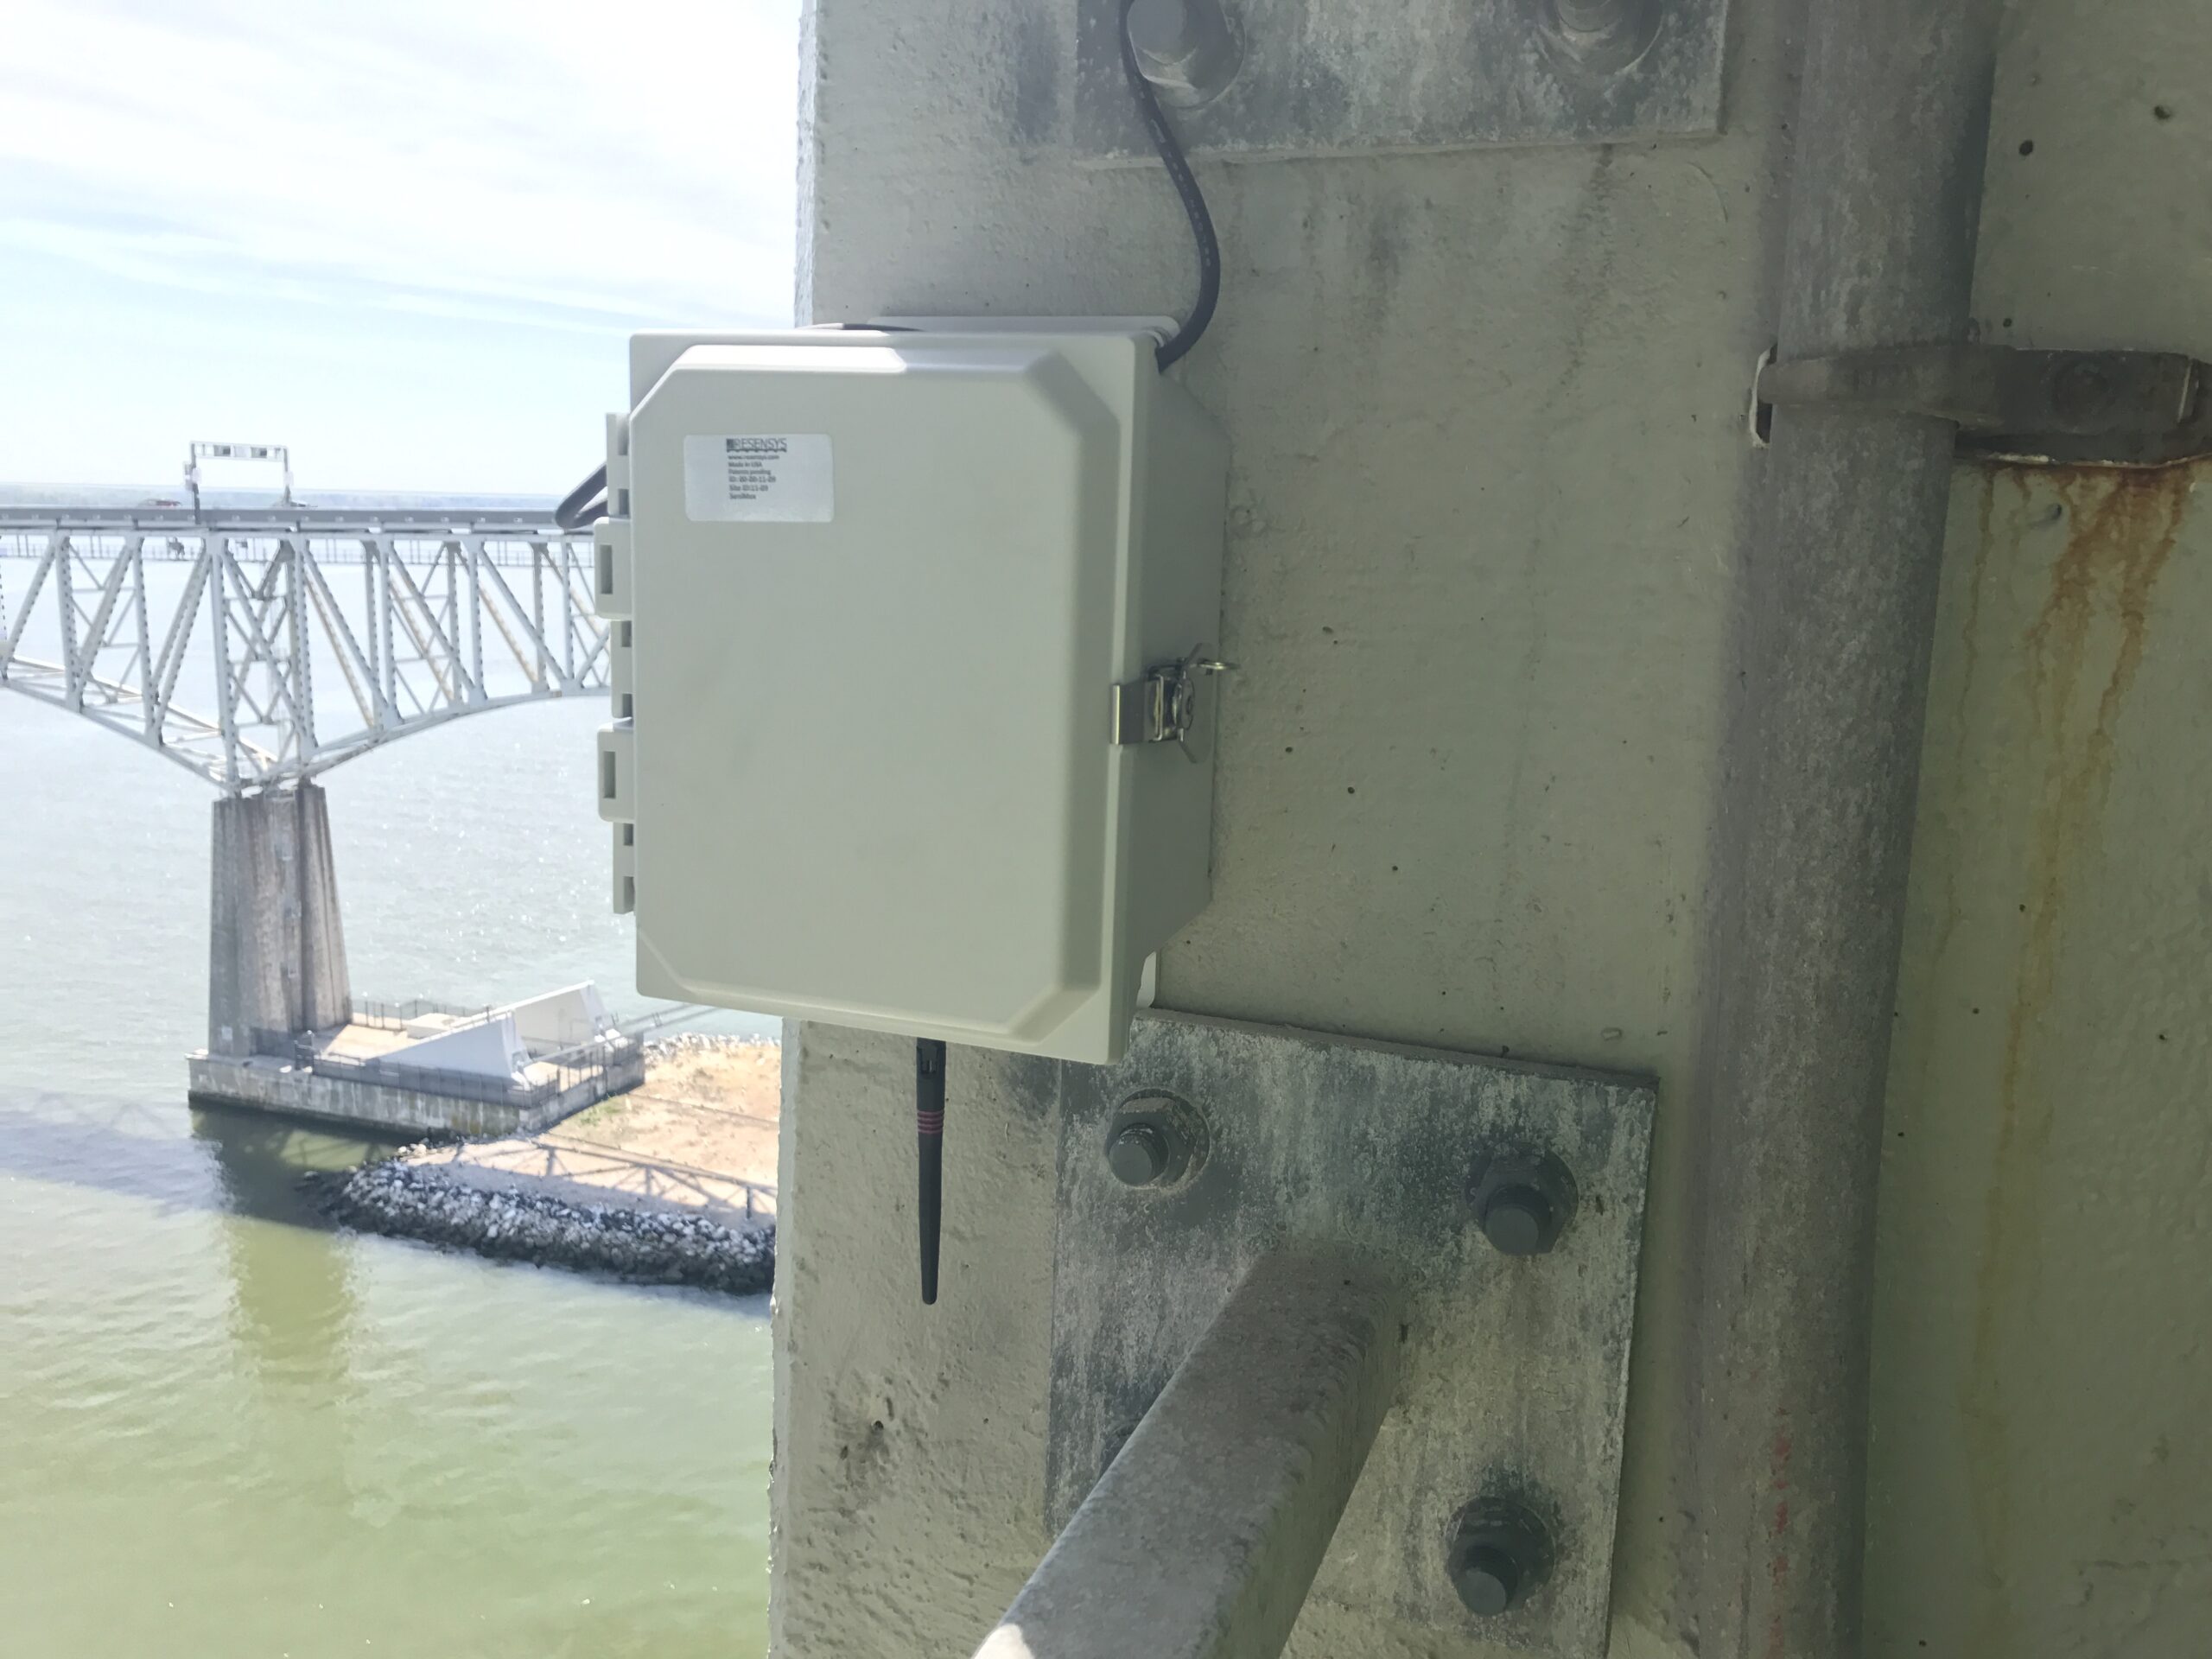 SeniMax (Data Acquisition) on bridge for wireless structural health monitoring - Sustainability